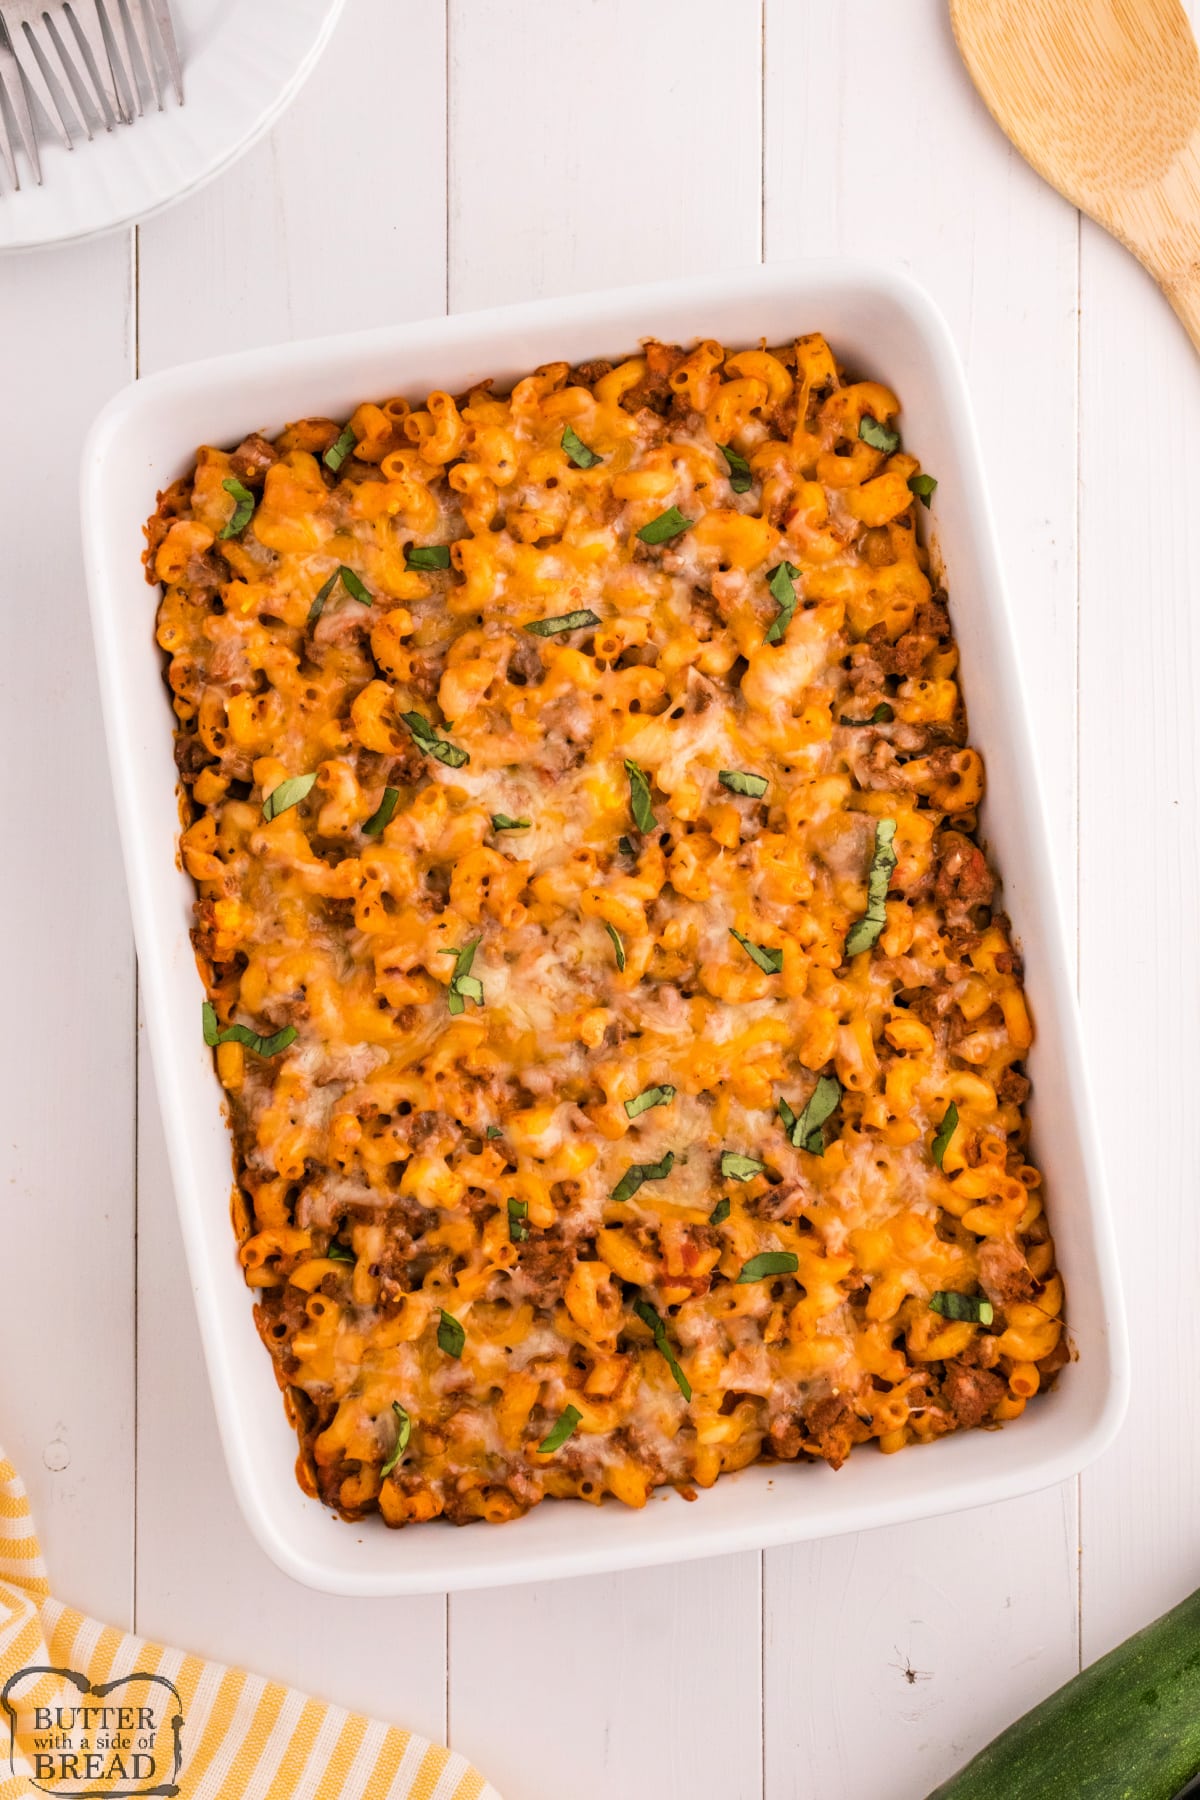 Baked casserole in dish.